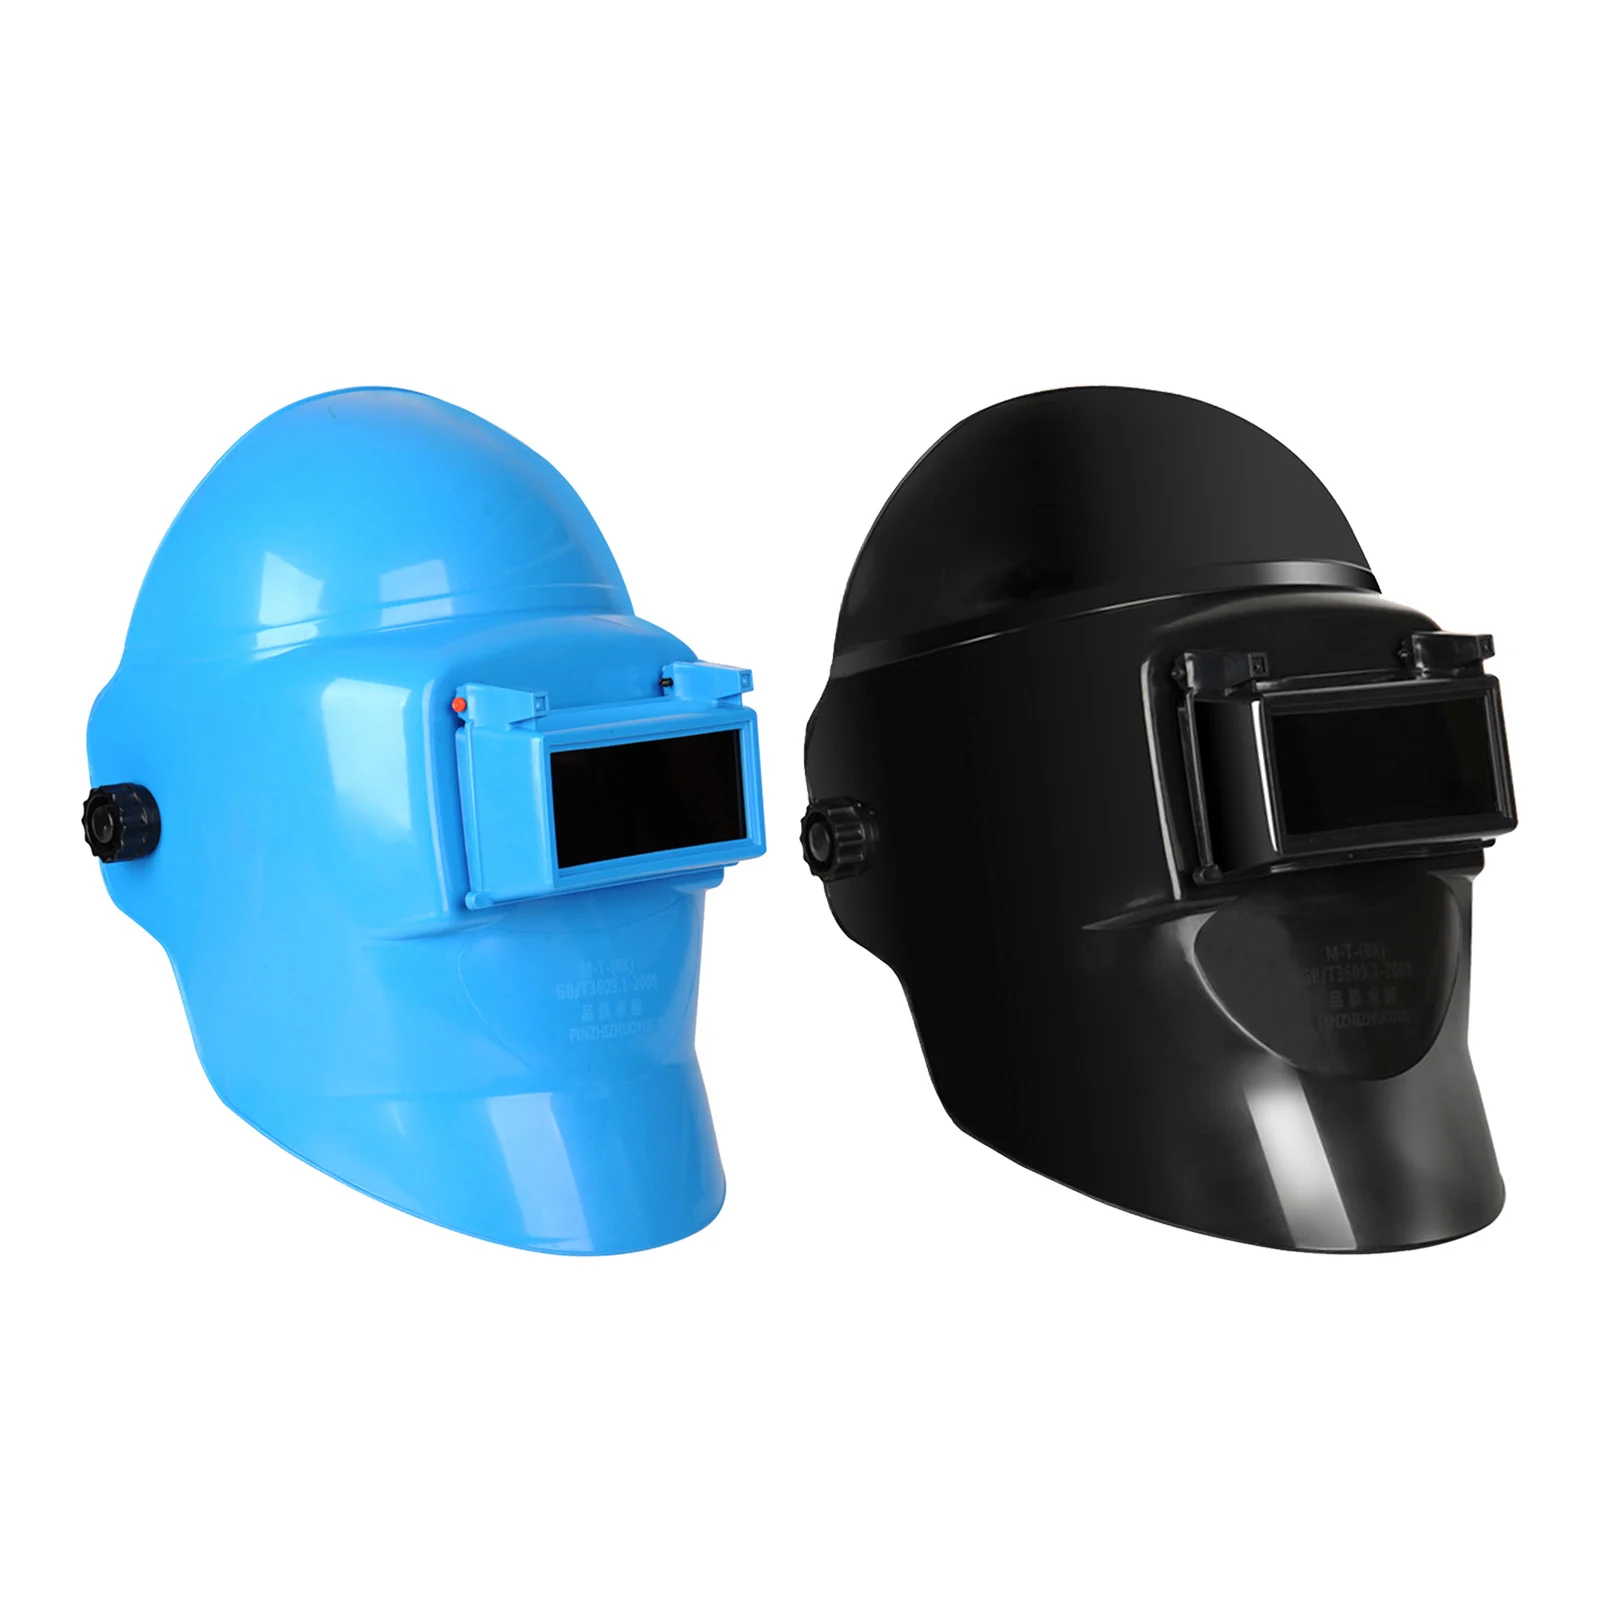 Welding Helmets Welding Mask Goggles for MMA MIG TIG, Durable And Heat Resistant